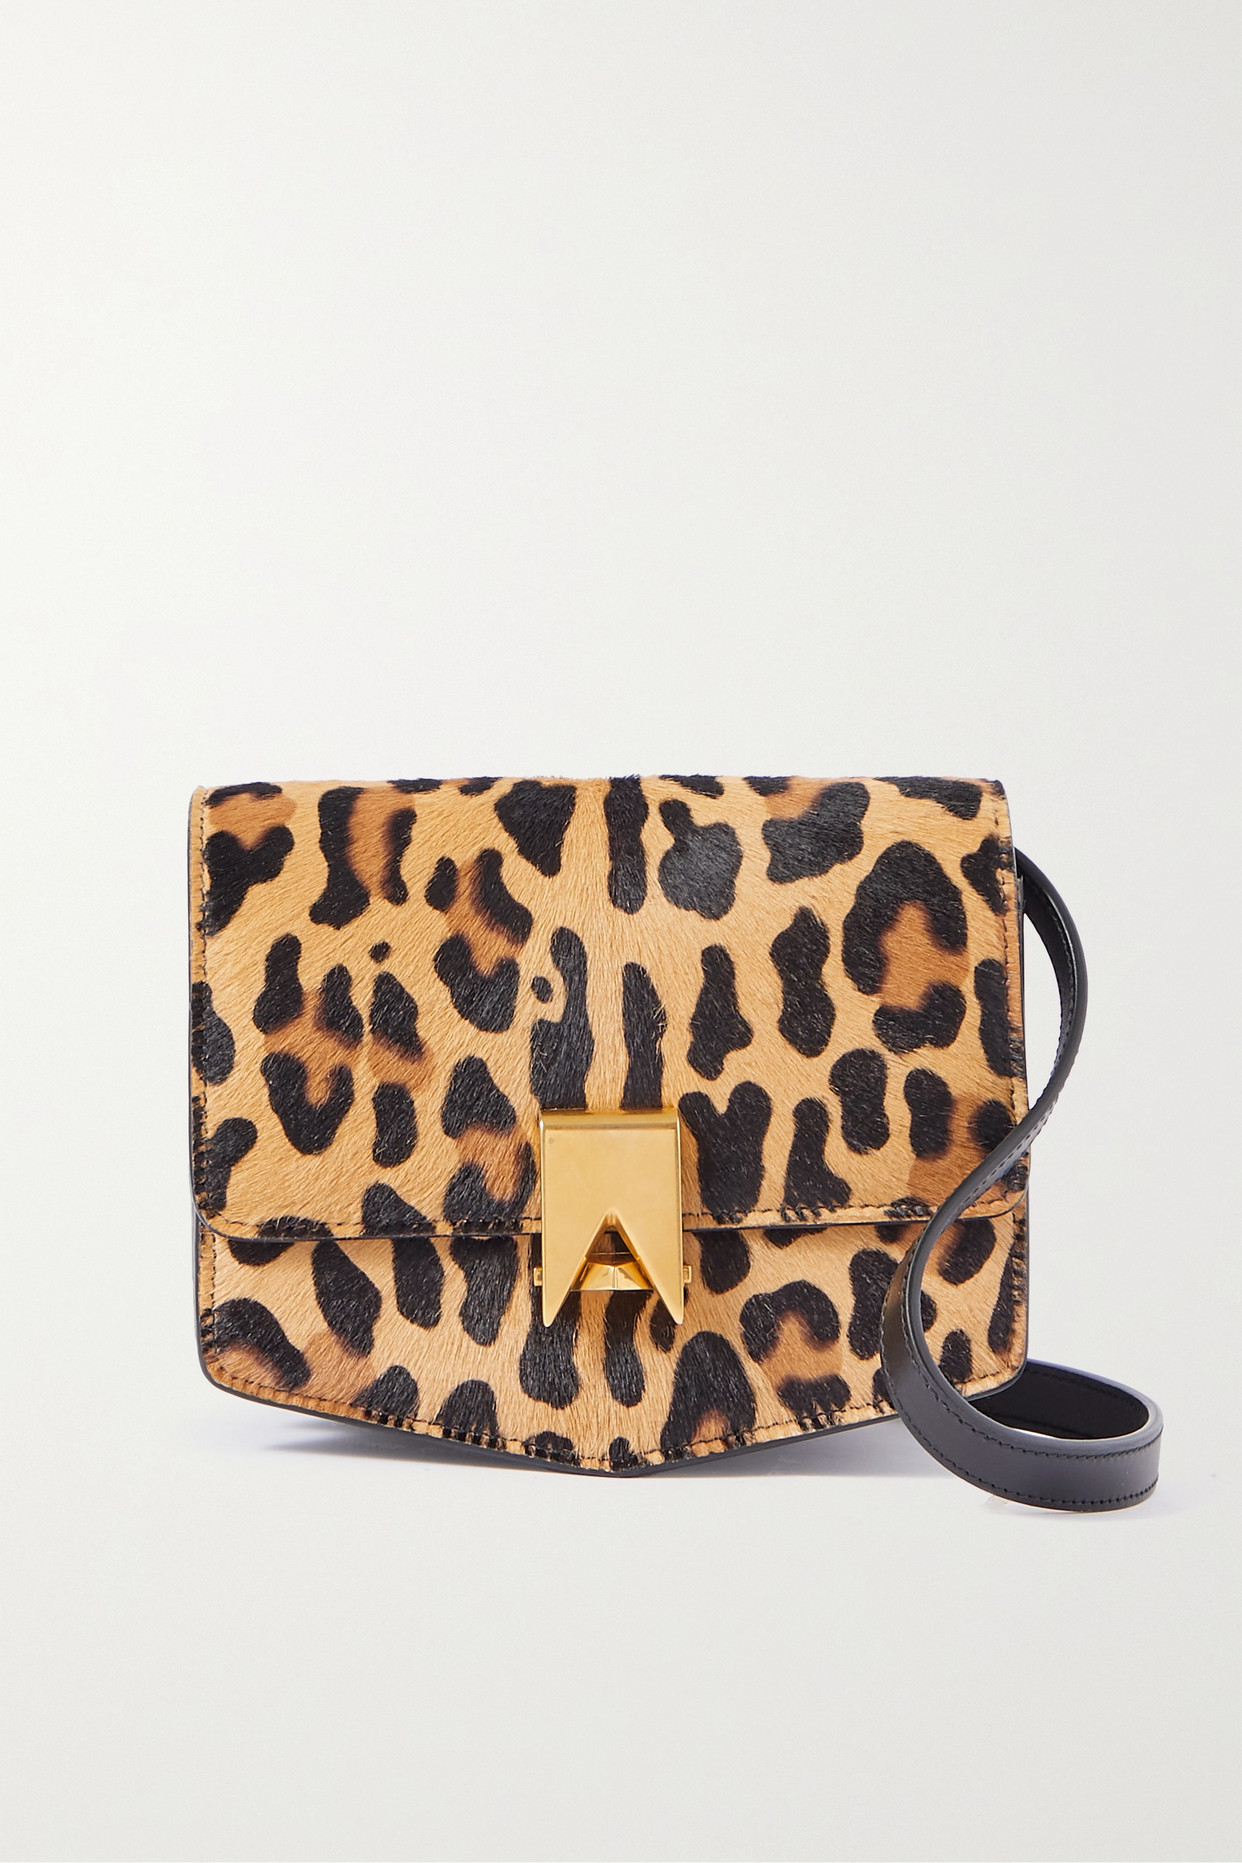 Le Papa Leopard-Print Pony Hair and Leather Shoulder Bag